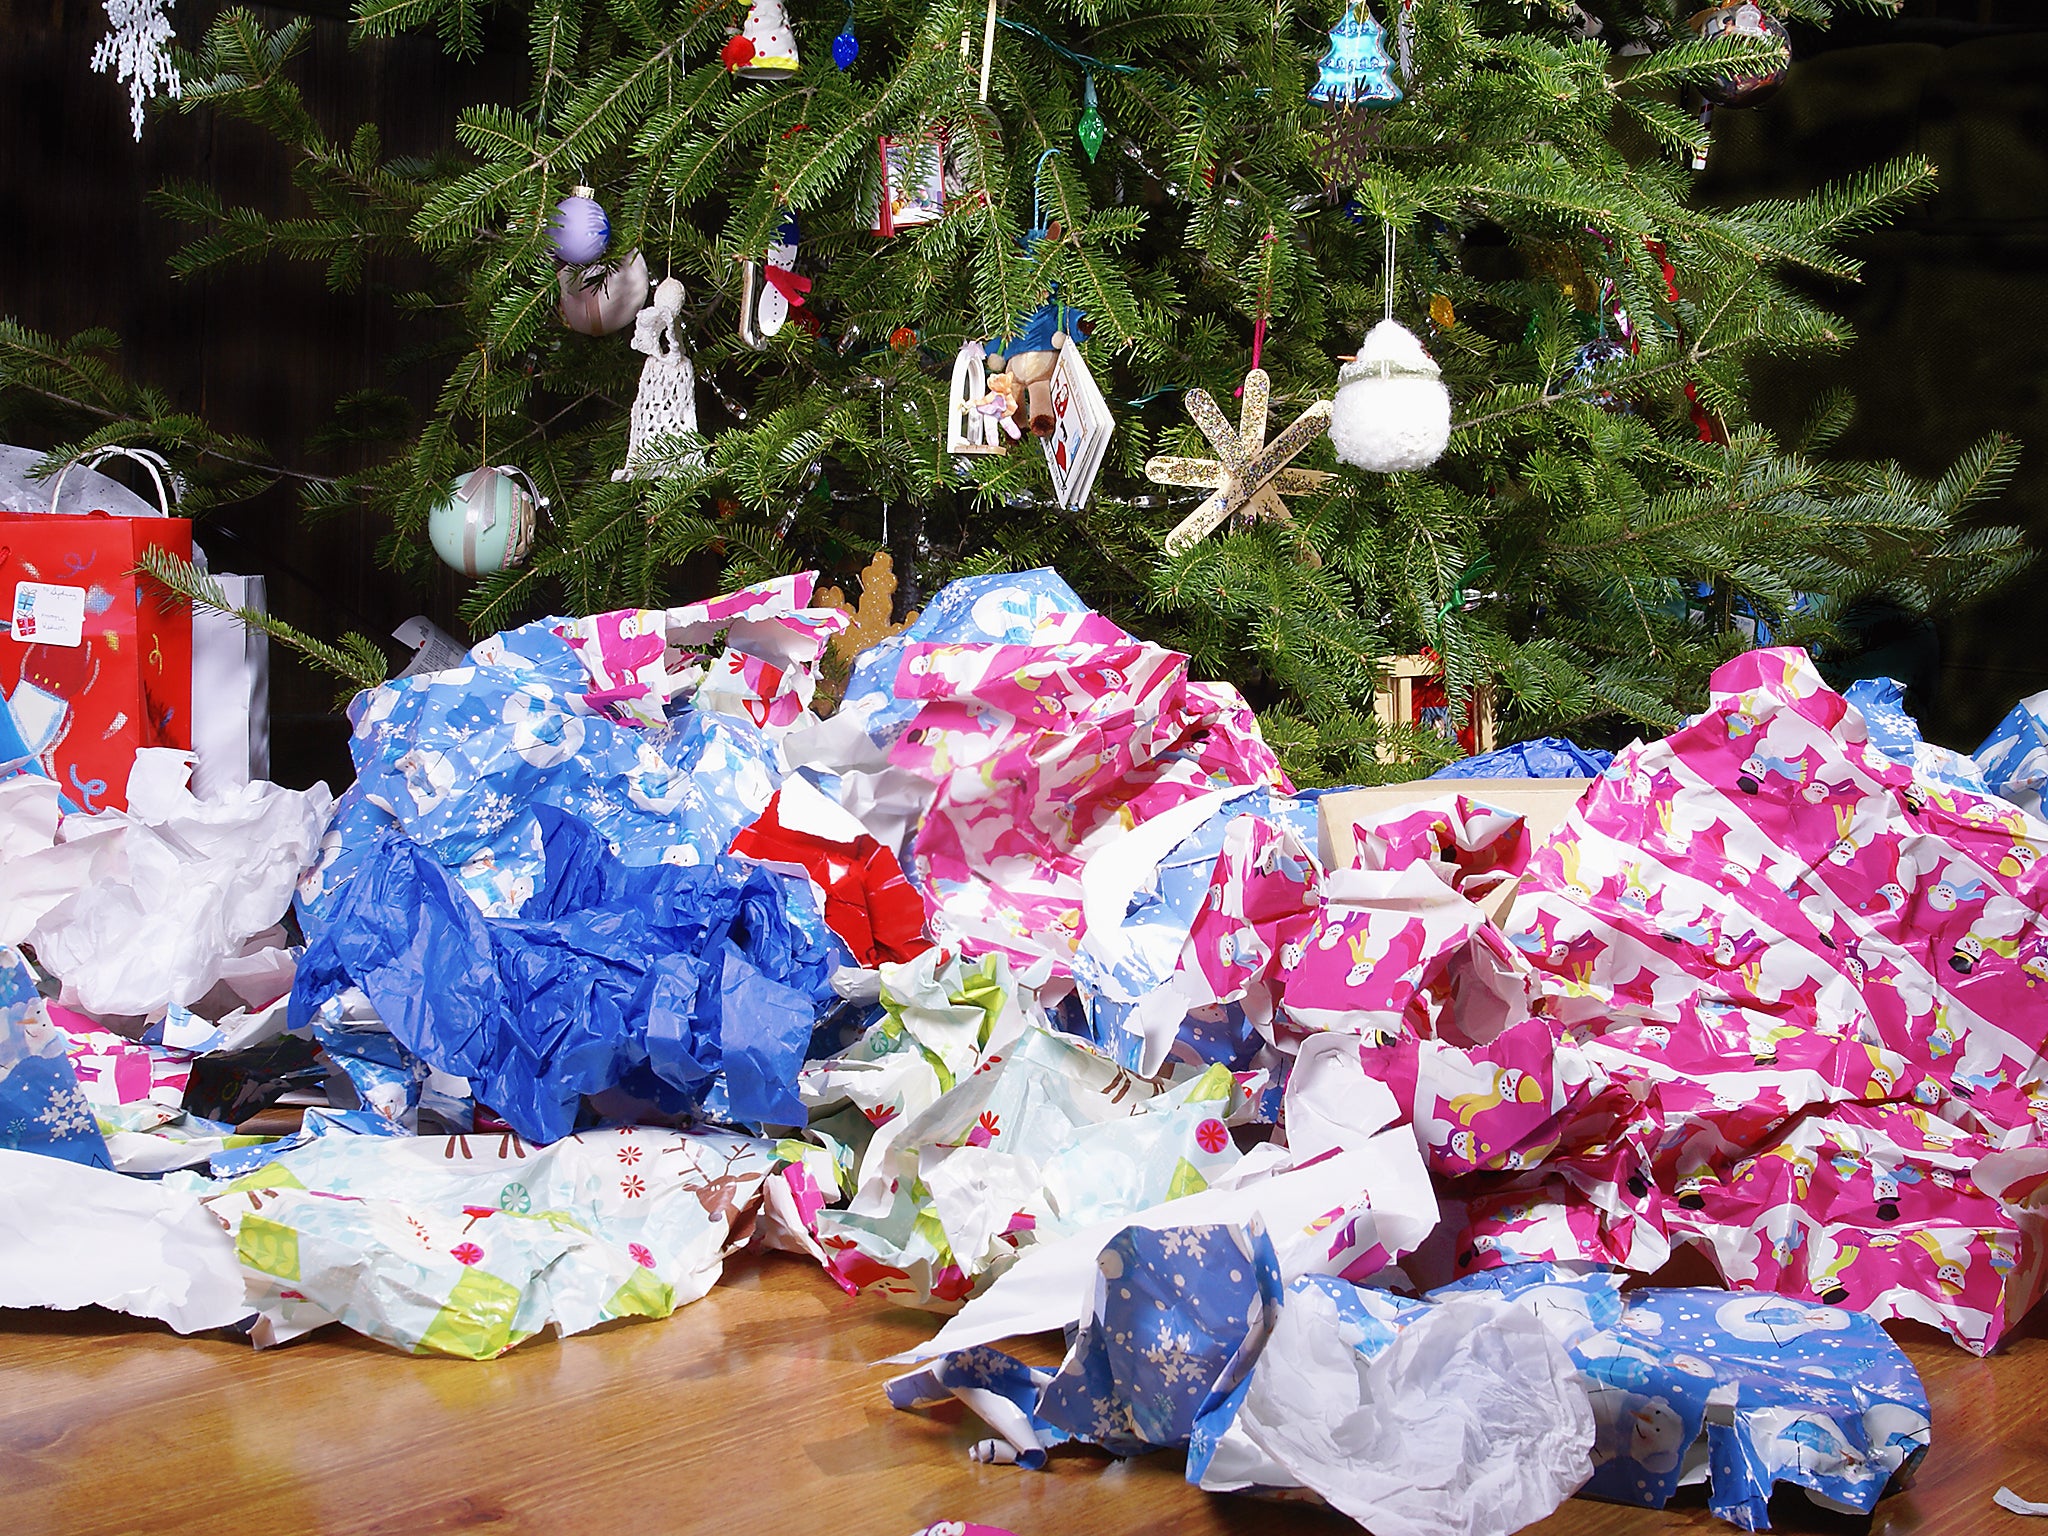 How to stop Christmas waste and the thousand of tonnes thrown away each